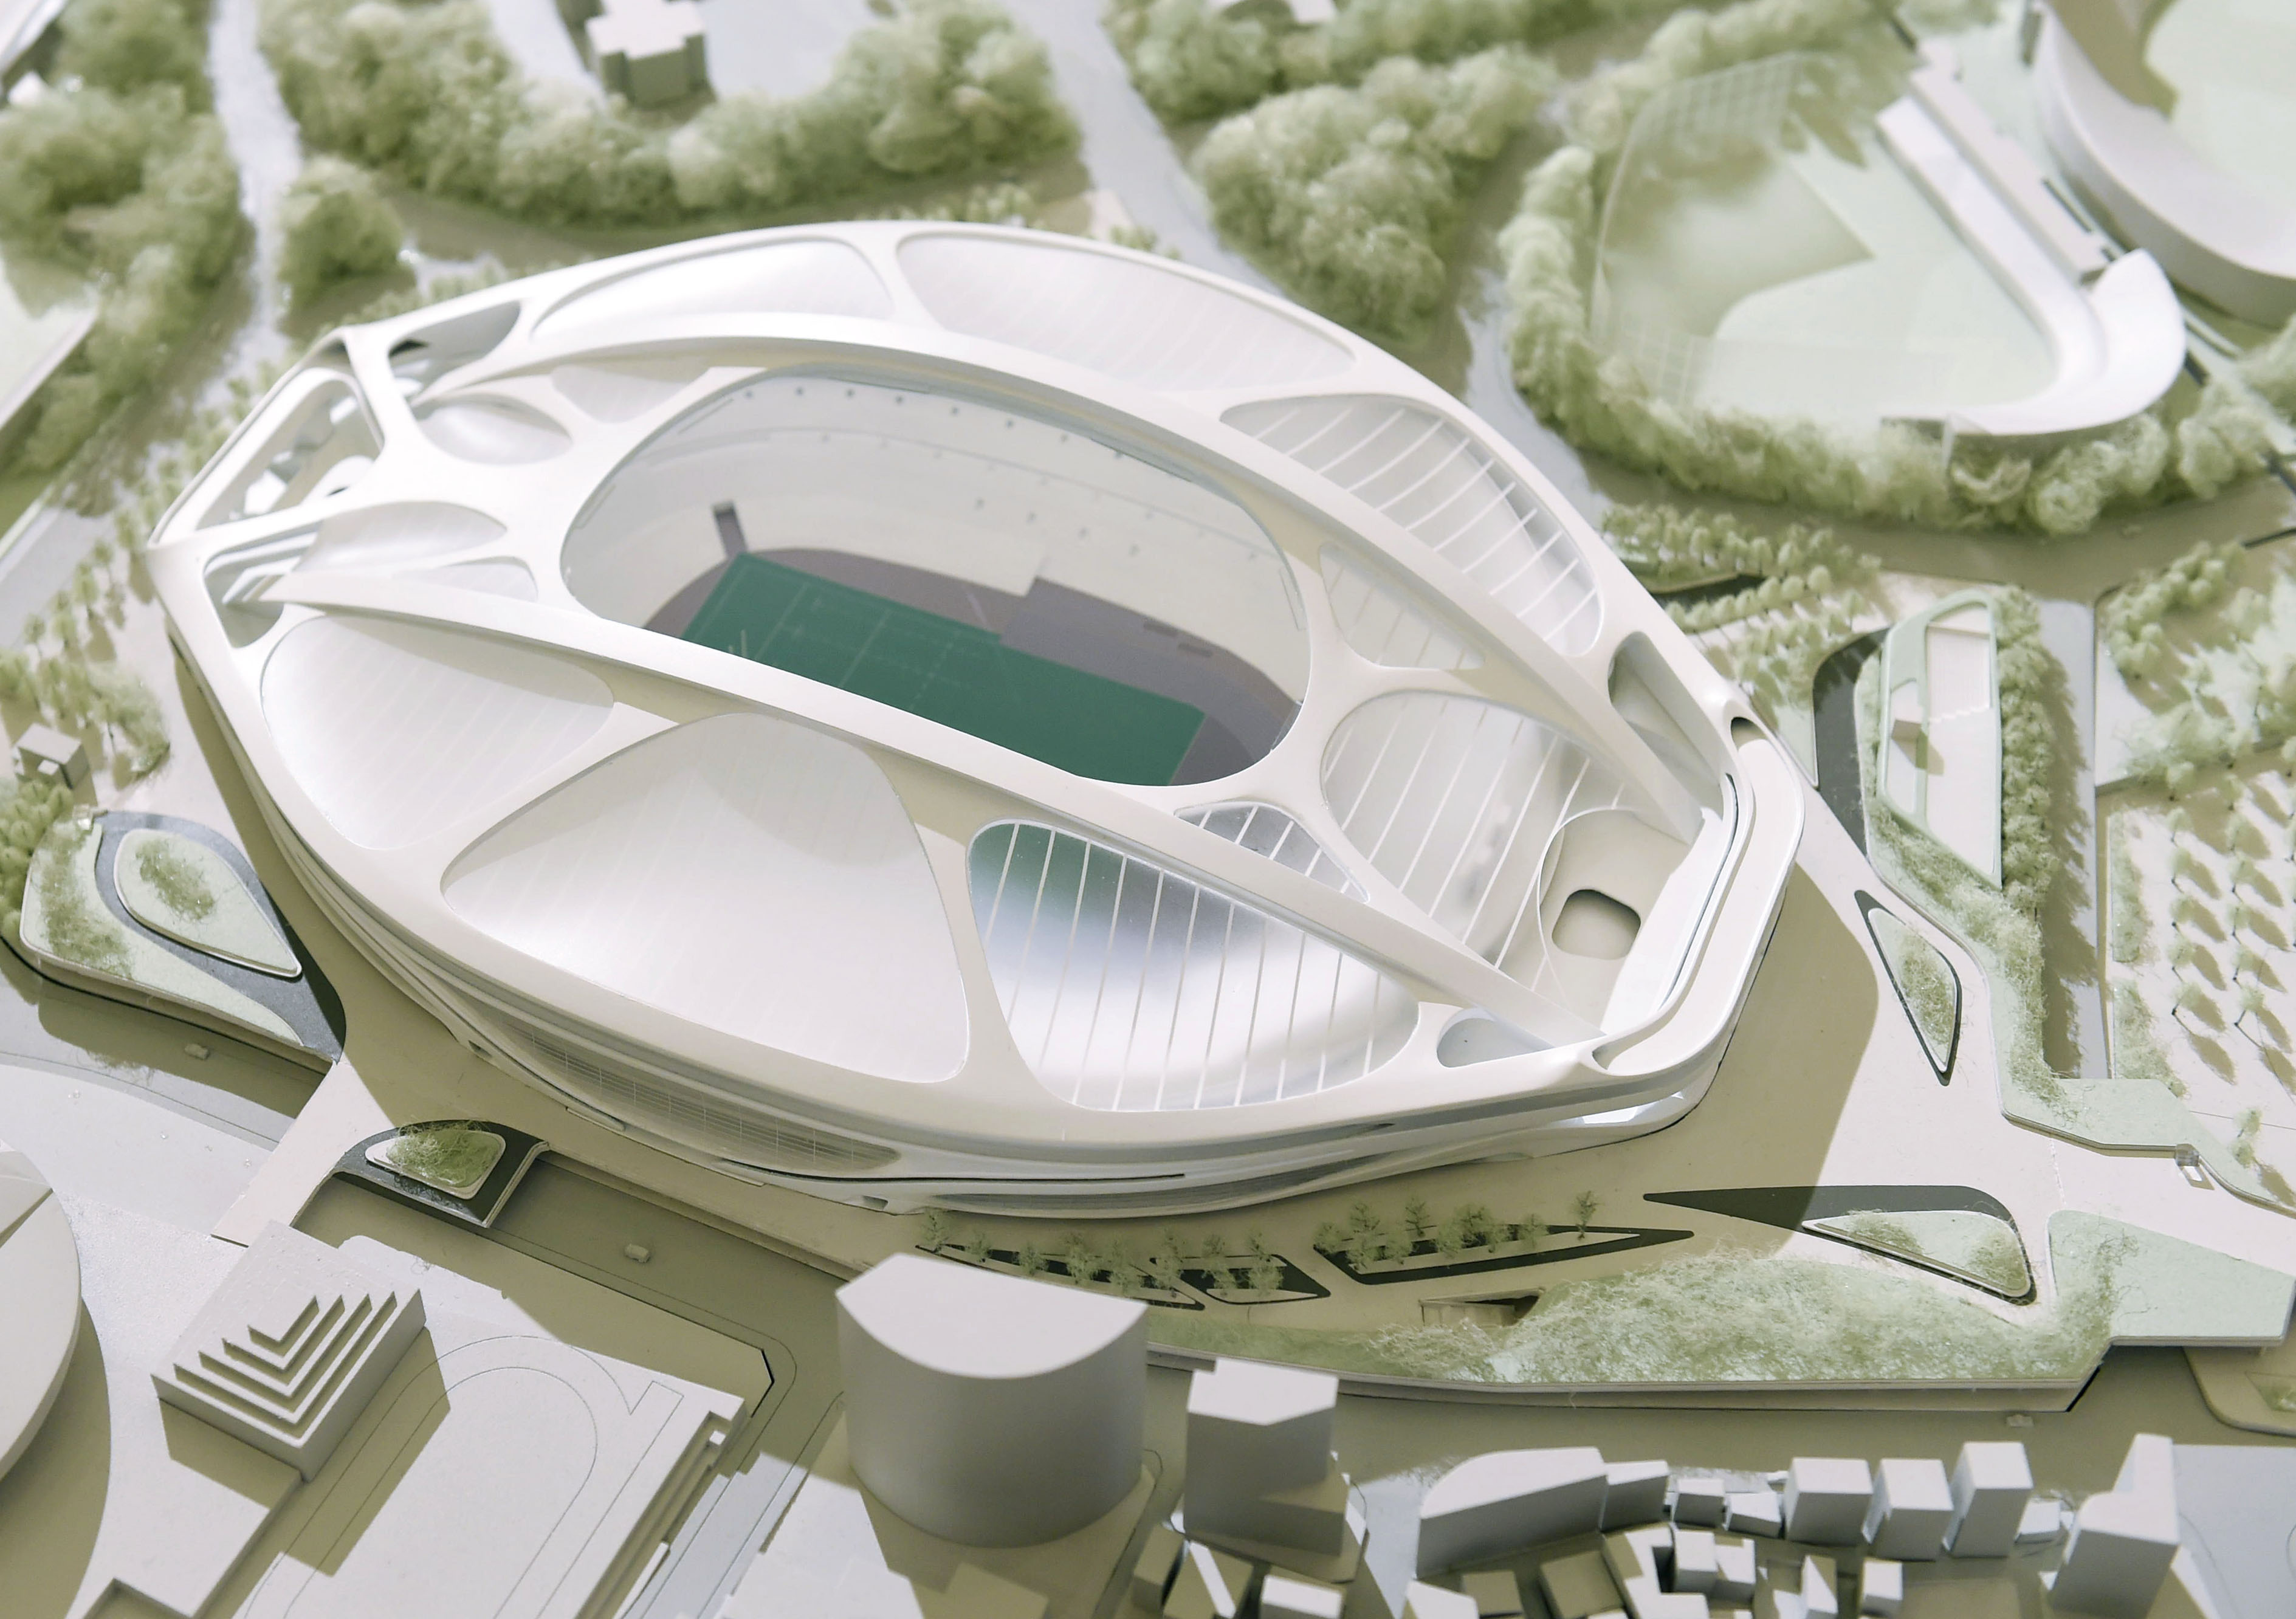 This design for the new National Stadium by Iraqi-British architect Zaha Hadid has been scrapped due to cost concerns. | KYODO